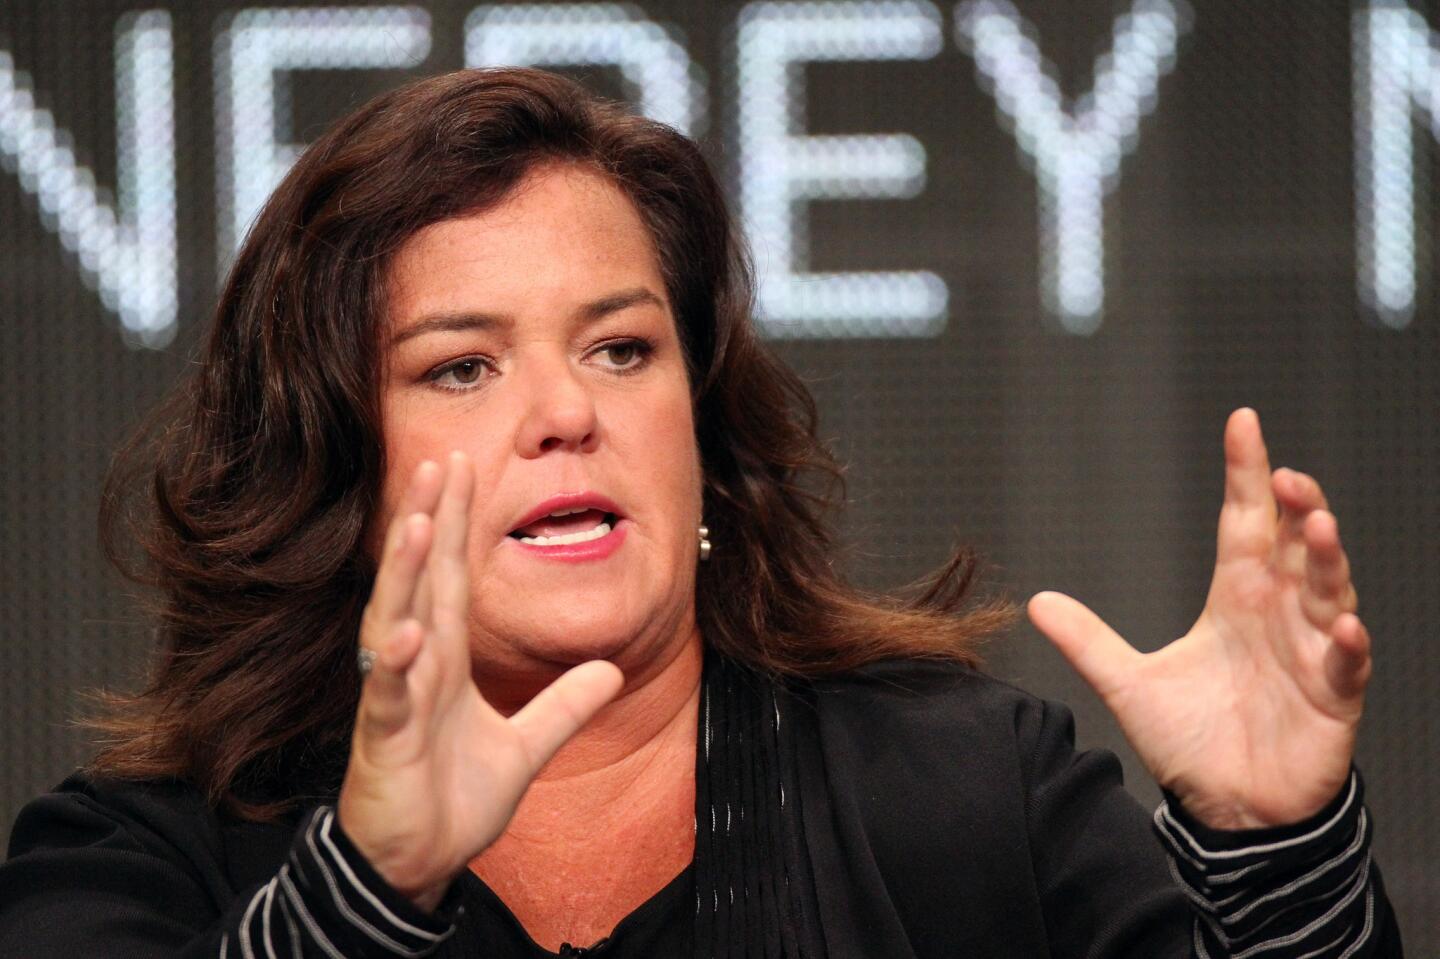 Rosie O'Donnell suffers a heart attack